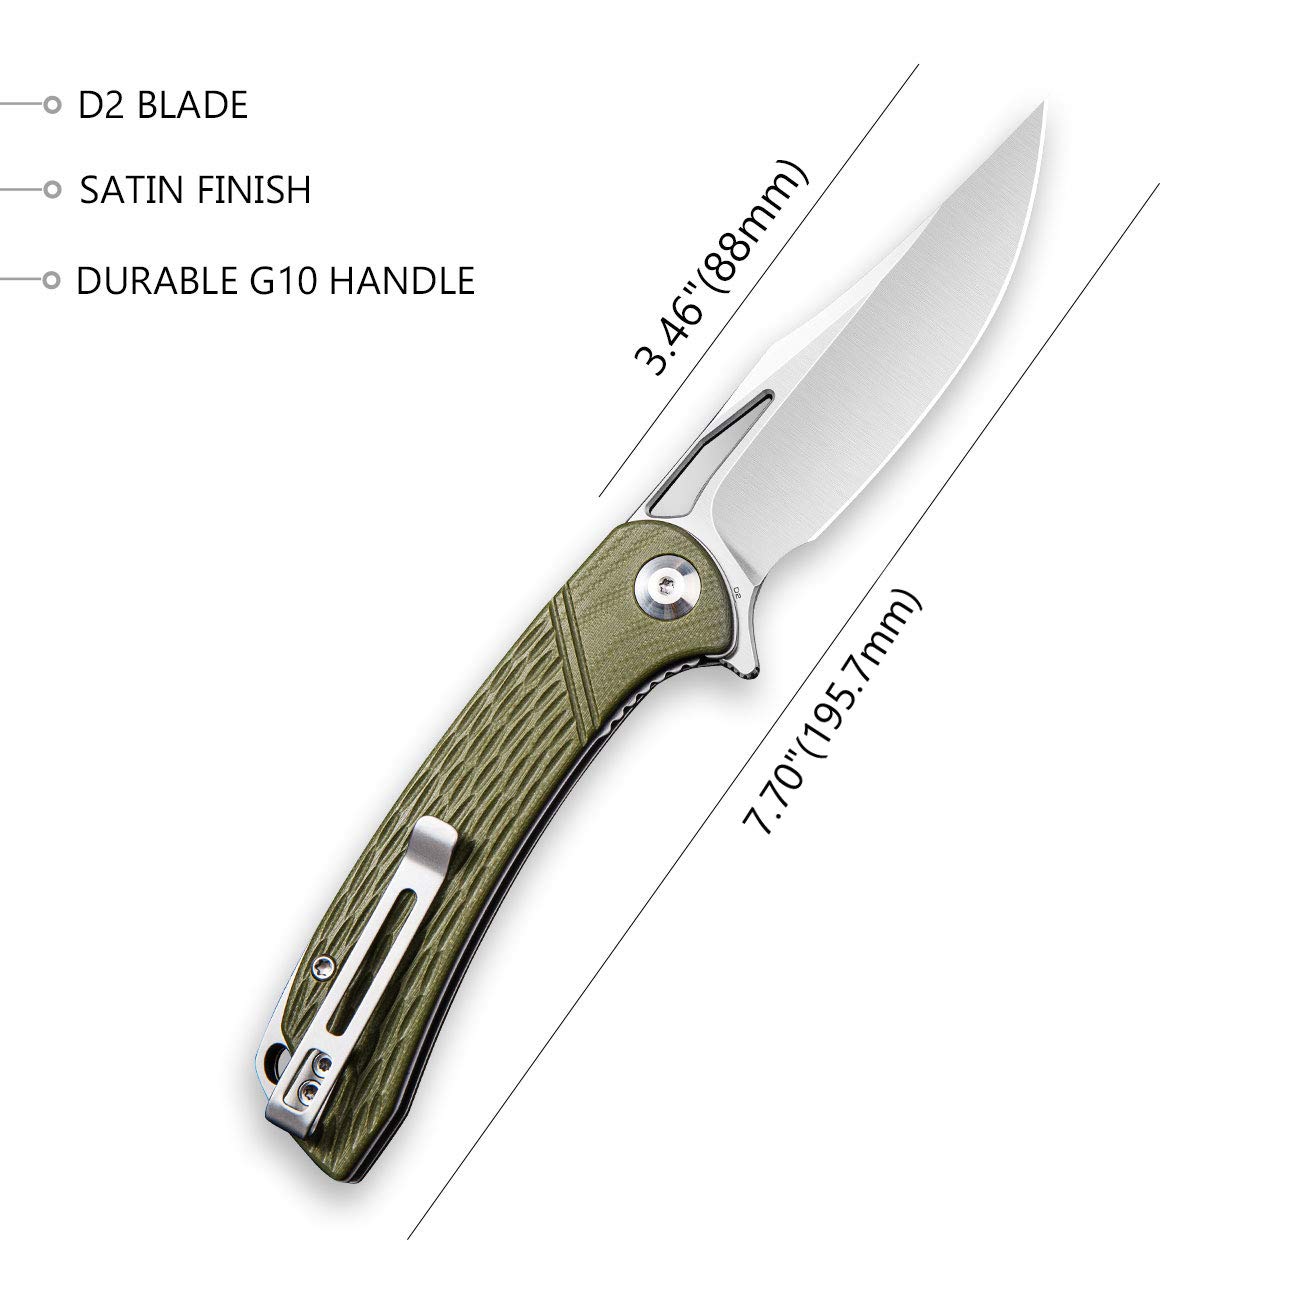 CIVIVI Dogma Pocket knife for EDC, Satin D2 Blade, G10 Handle, Liner Lock, Ball Bearings Pivot,Flipper Opening Utility Knife with Reversible Deep Carry Pocket Clip C2005A (OD Green)